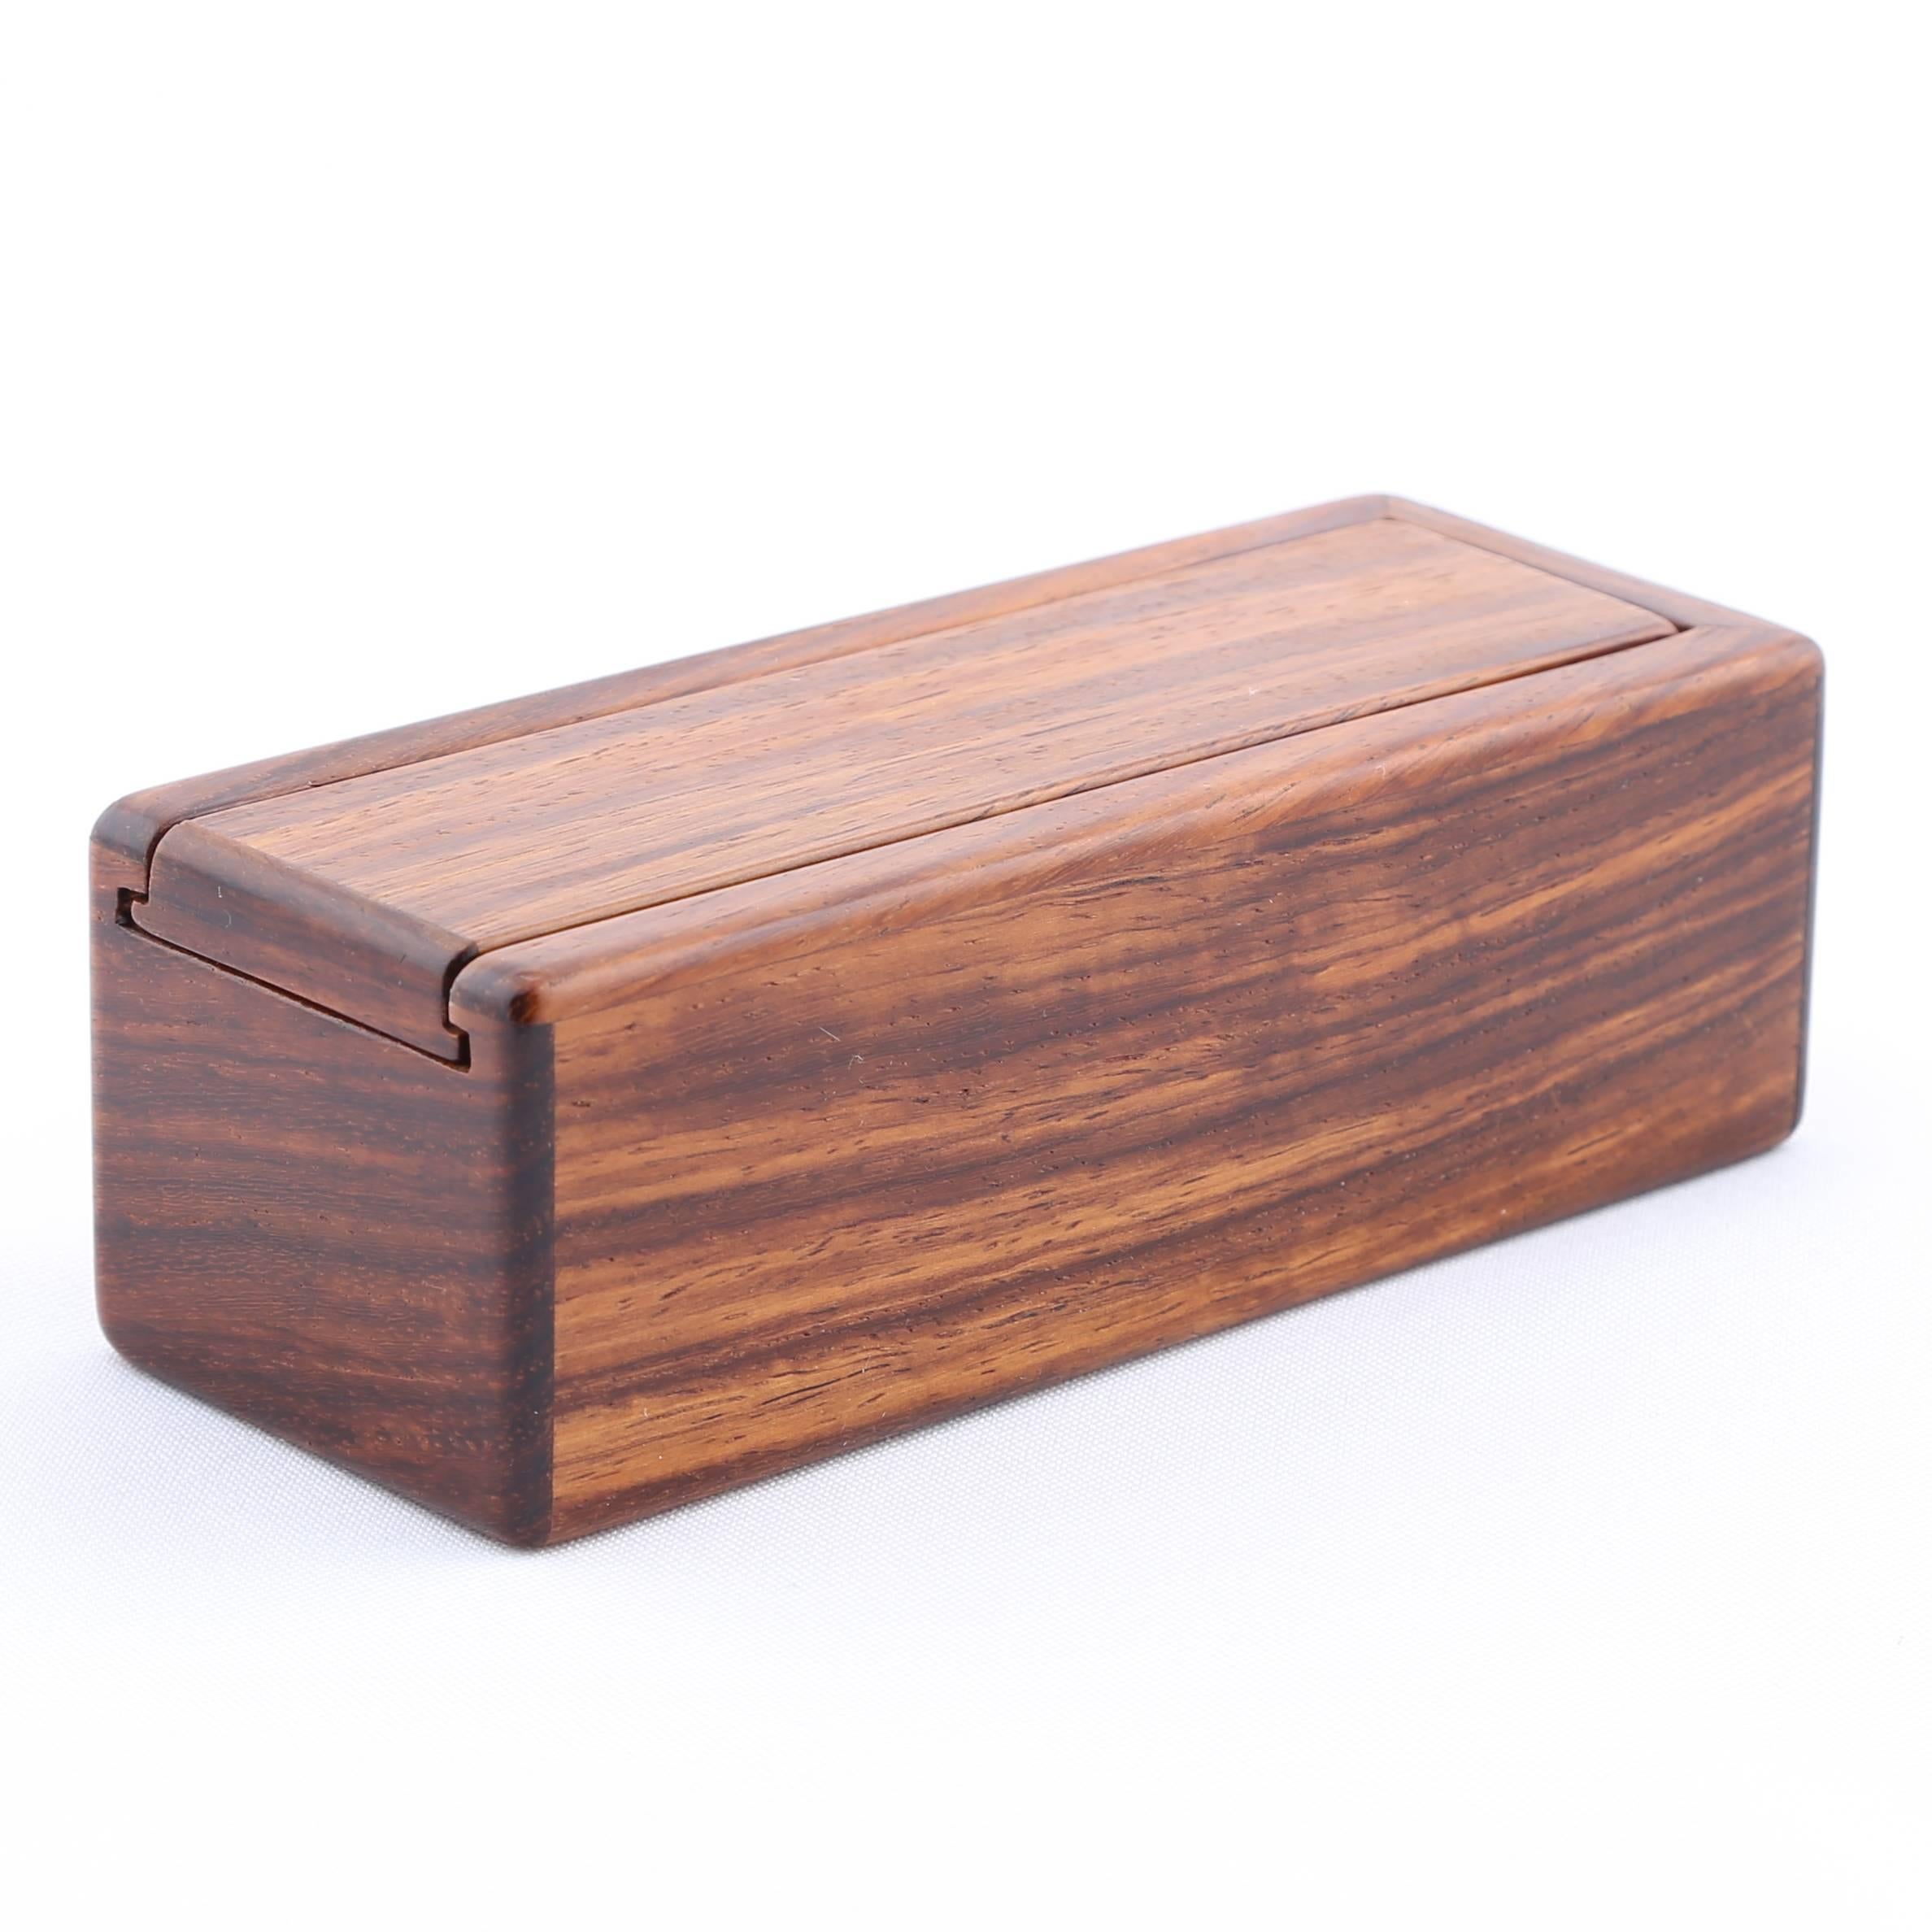 American Wooden Box with Sliding Top by Jerry Madrigale, circa 1980s